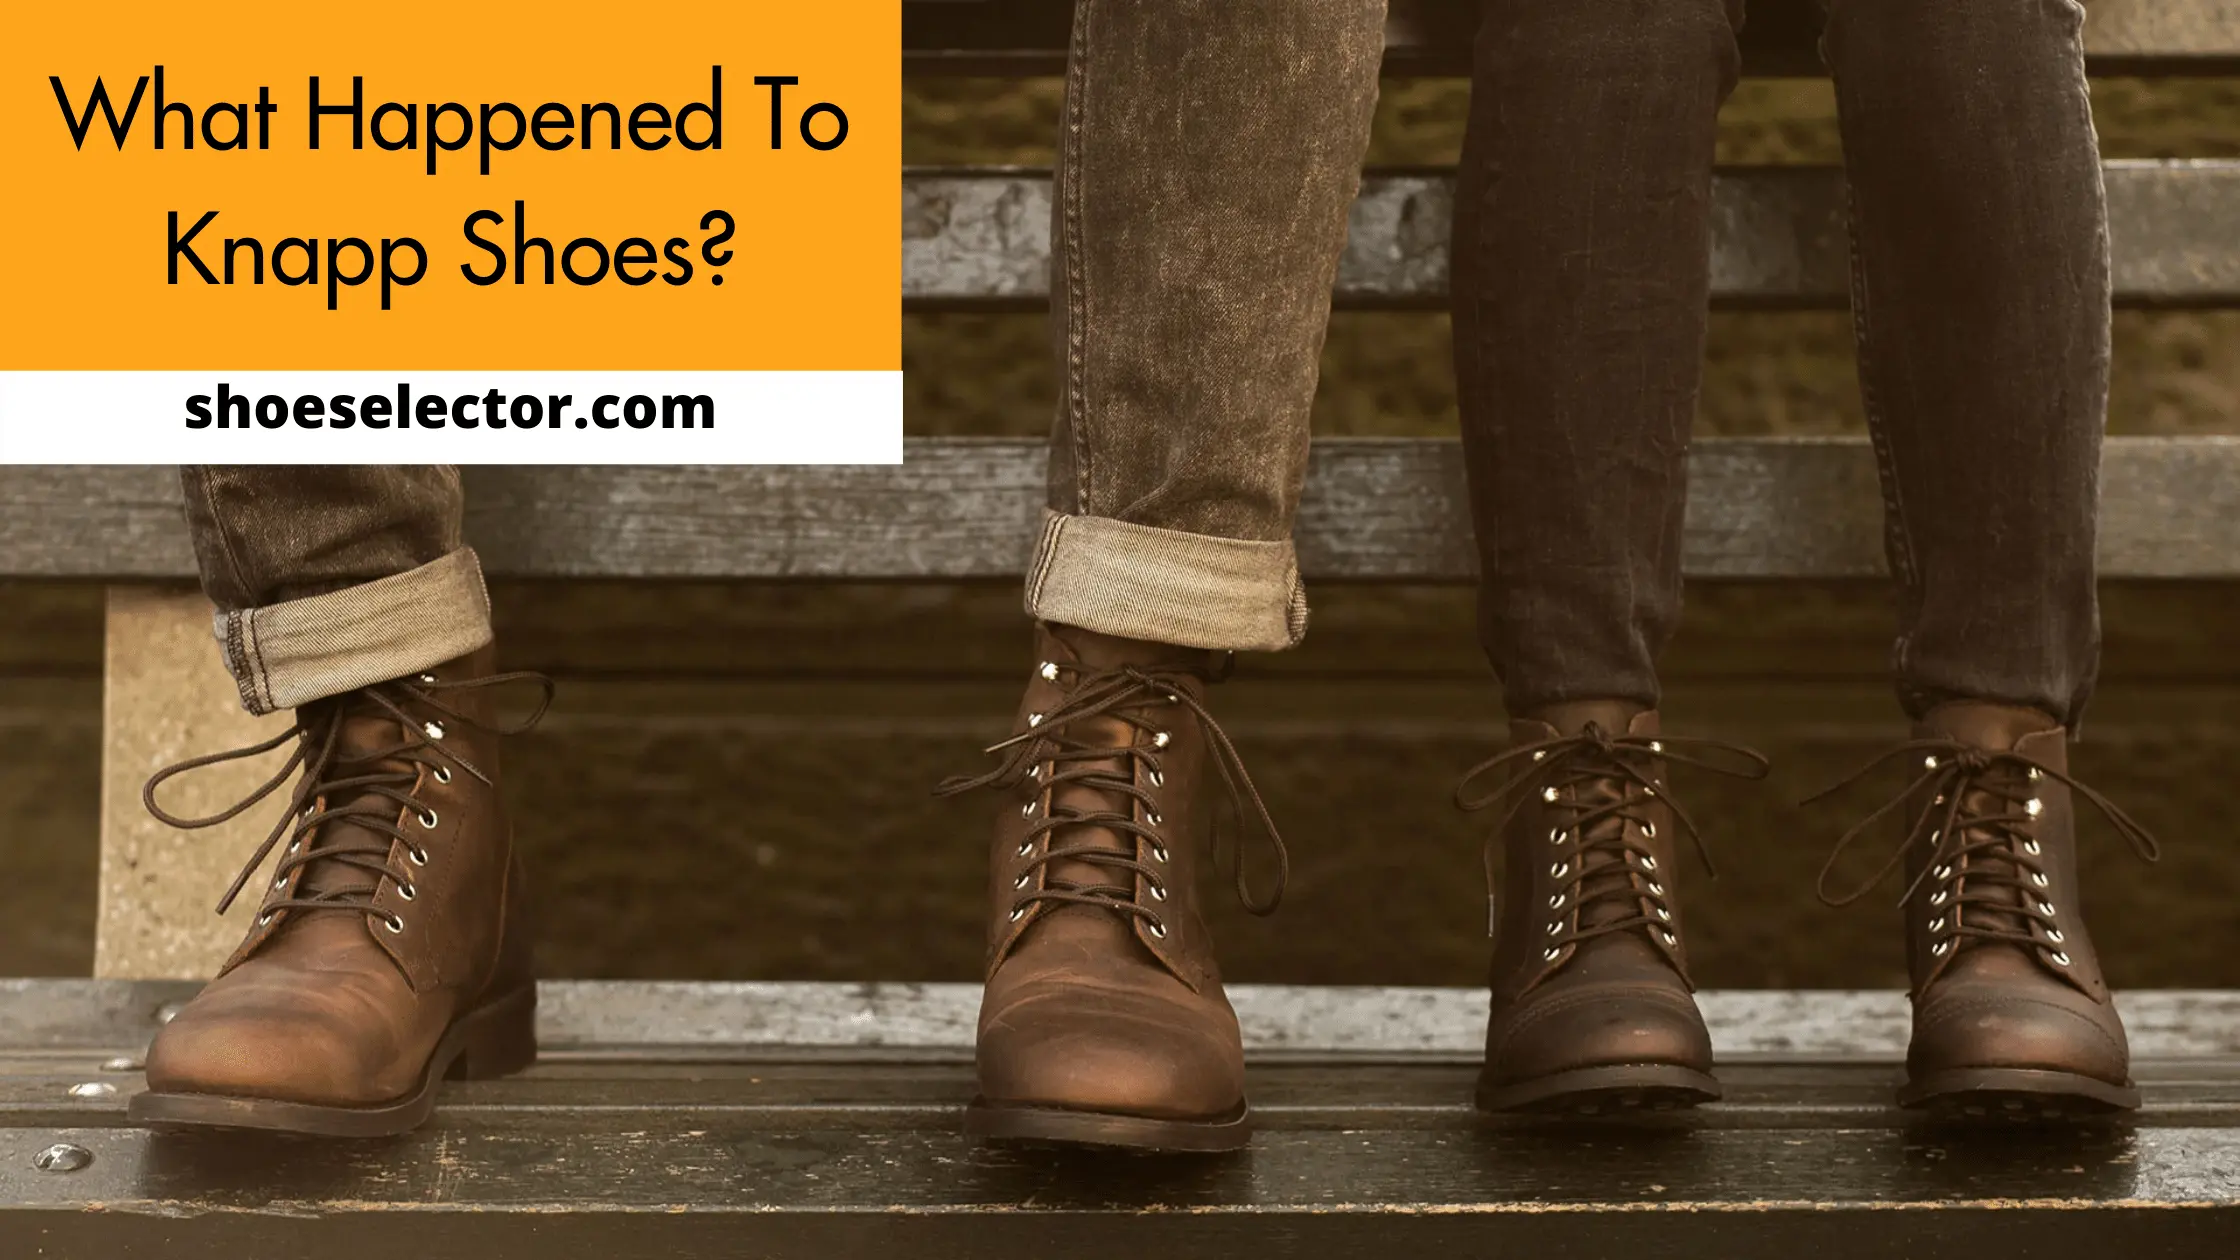 What Happened to Knapp Shoes? - Simple Guide